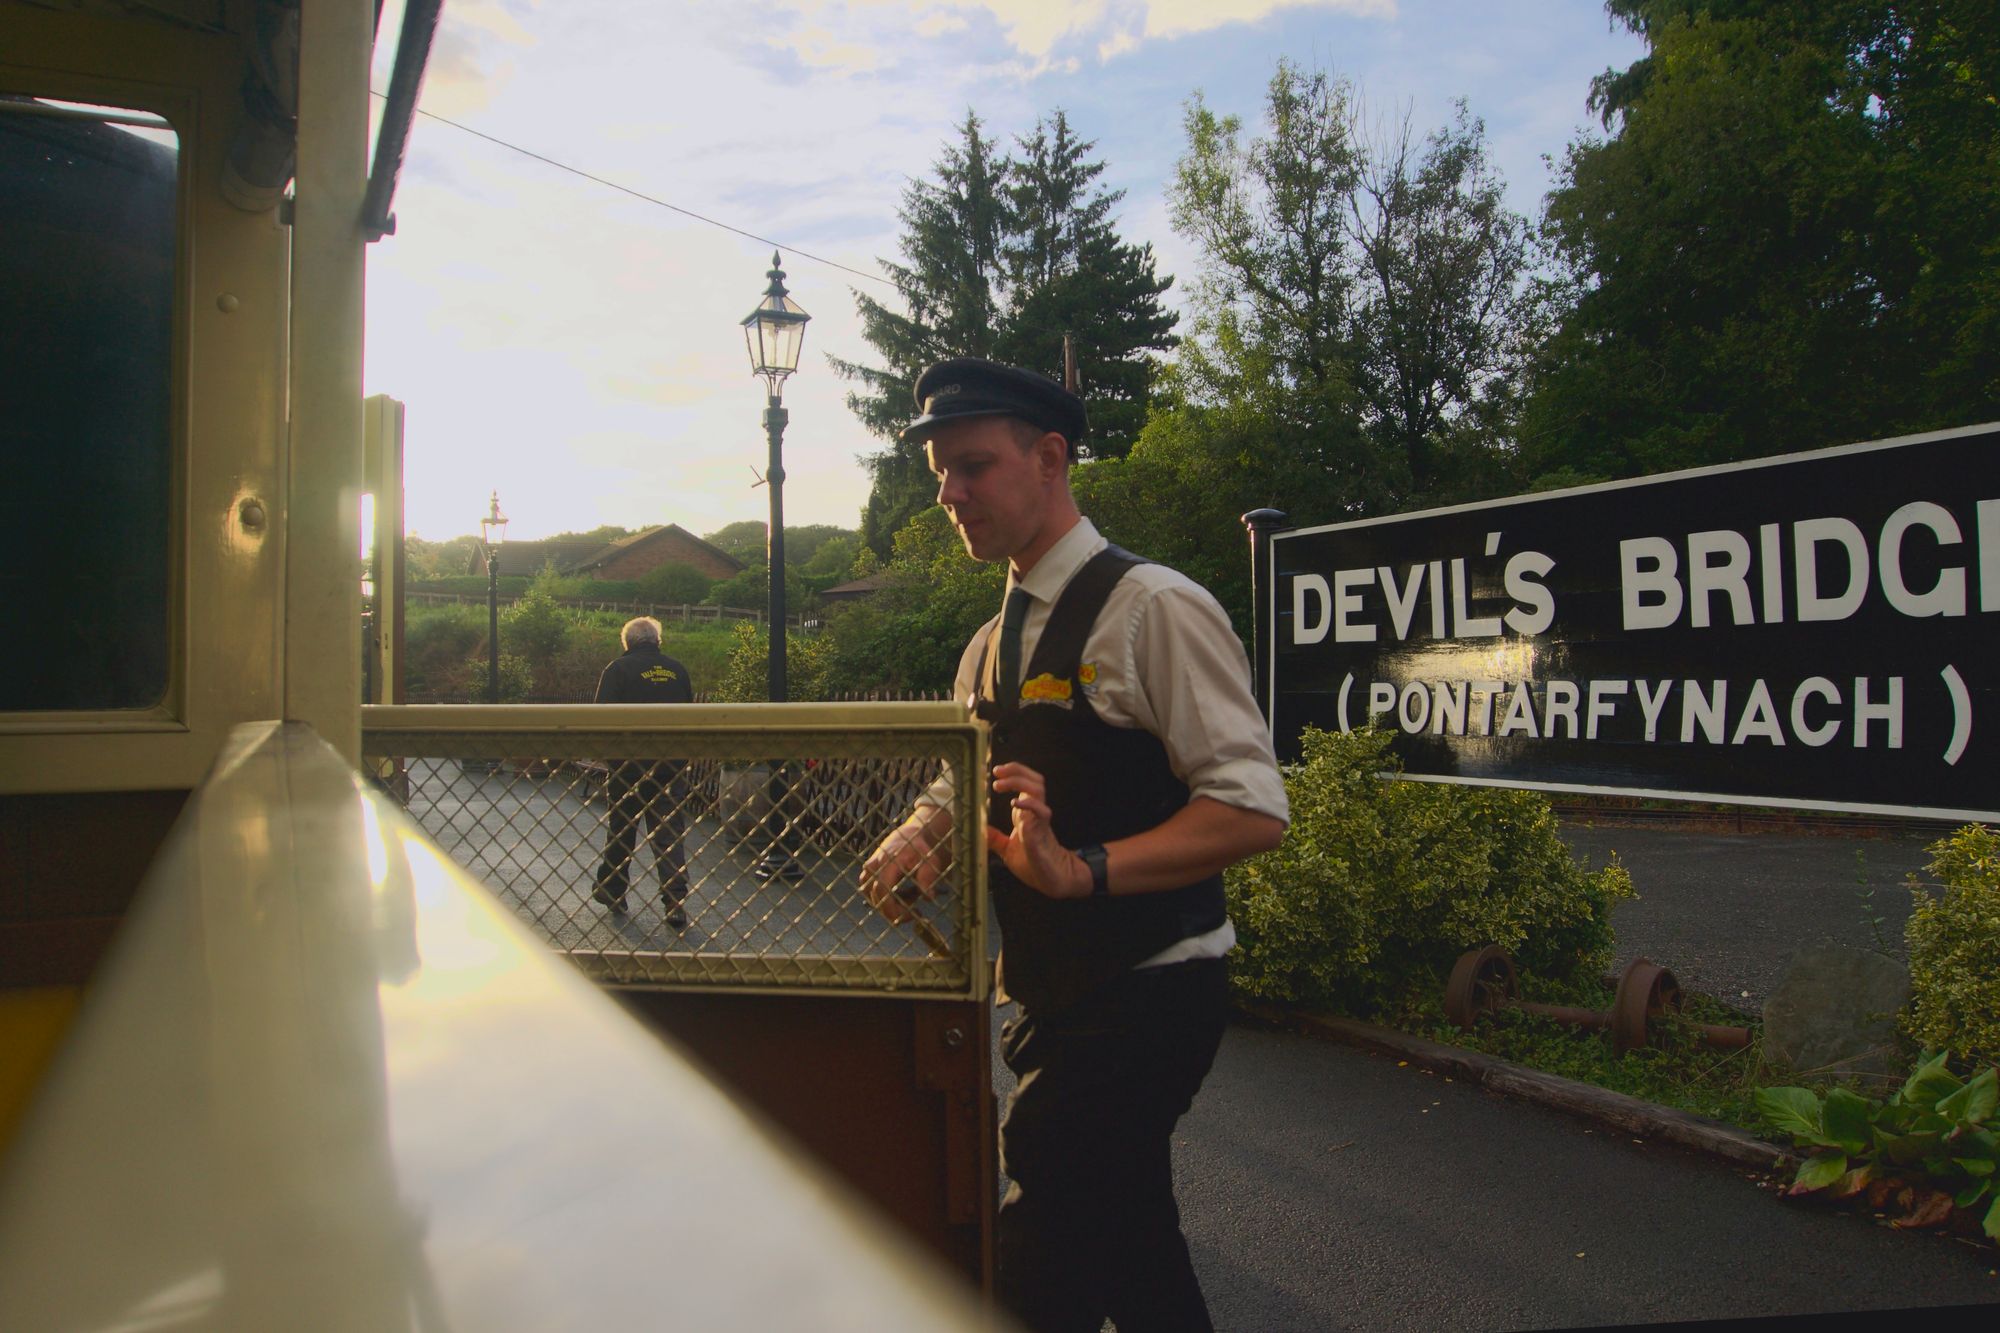 A railway worker in a waistcoat and peaked cap closes a half-hight door to an open railway carriage. The station sign reads DEVIL'S BRIDGE (PONTARFYNACH.)